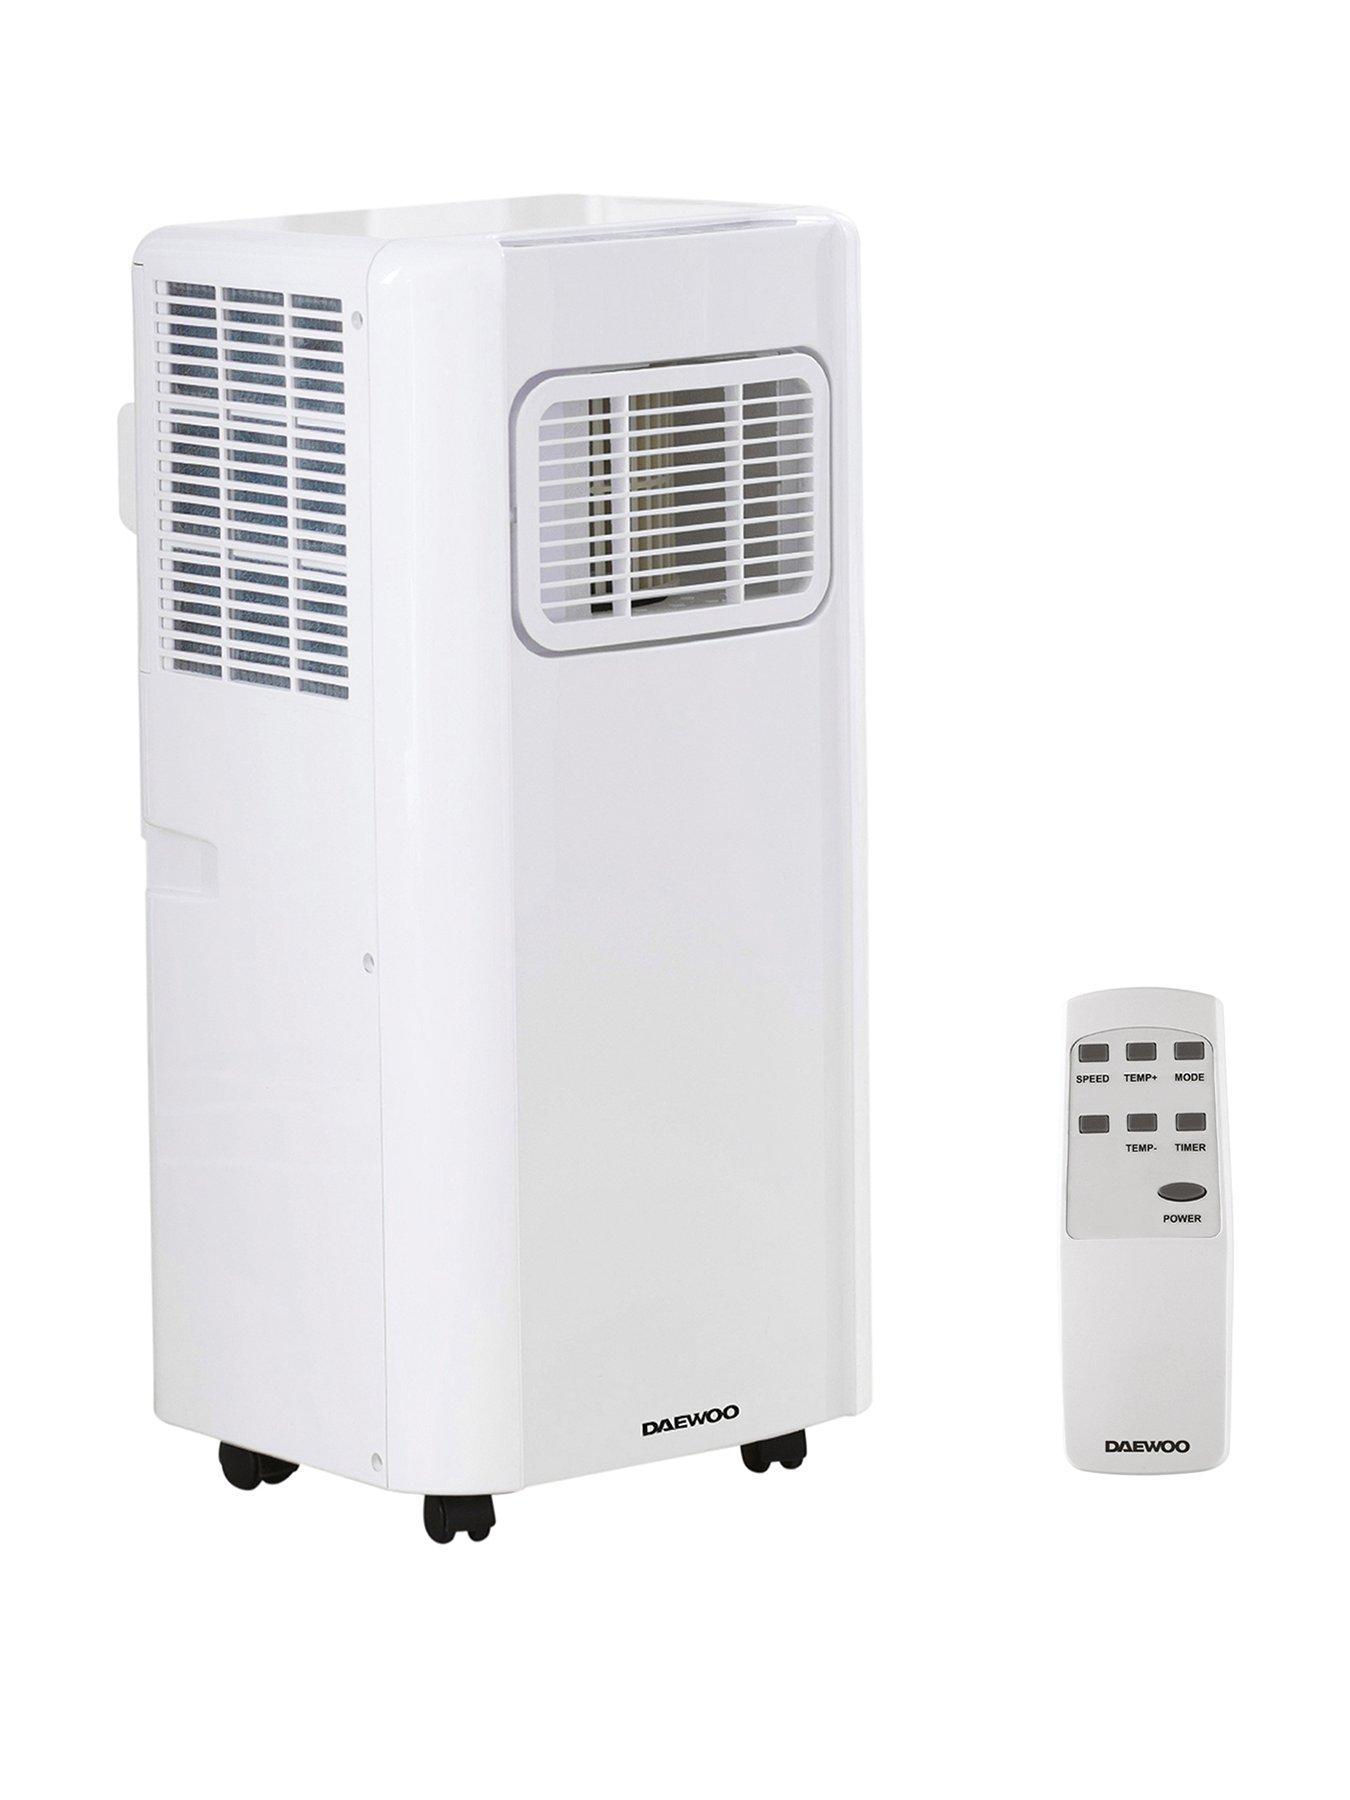 Daewoo 9000 Btu Portable Air Conditioner With Auto Swing